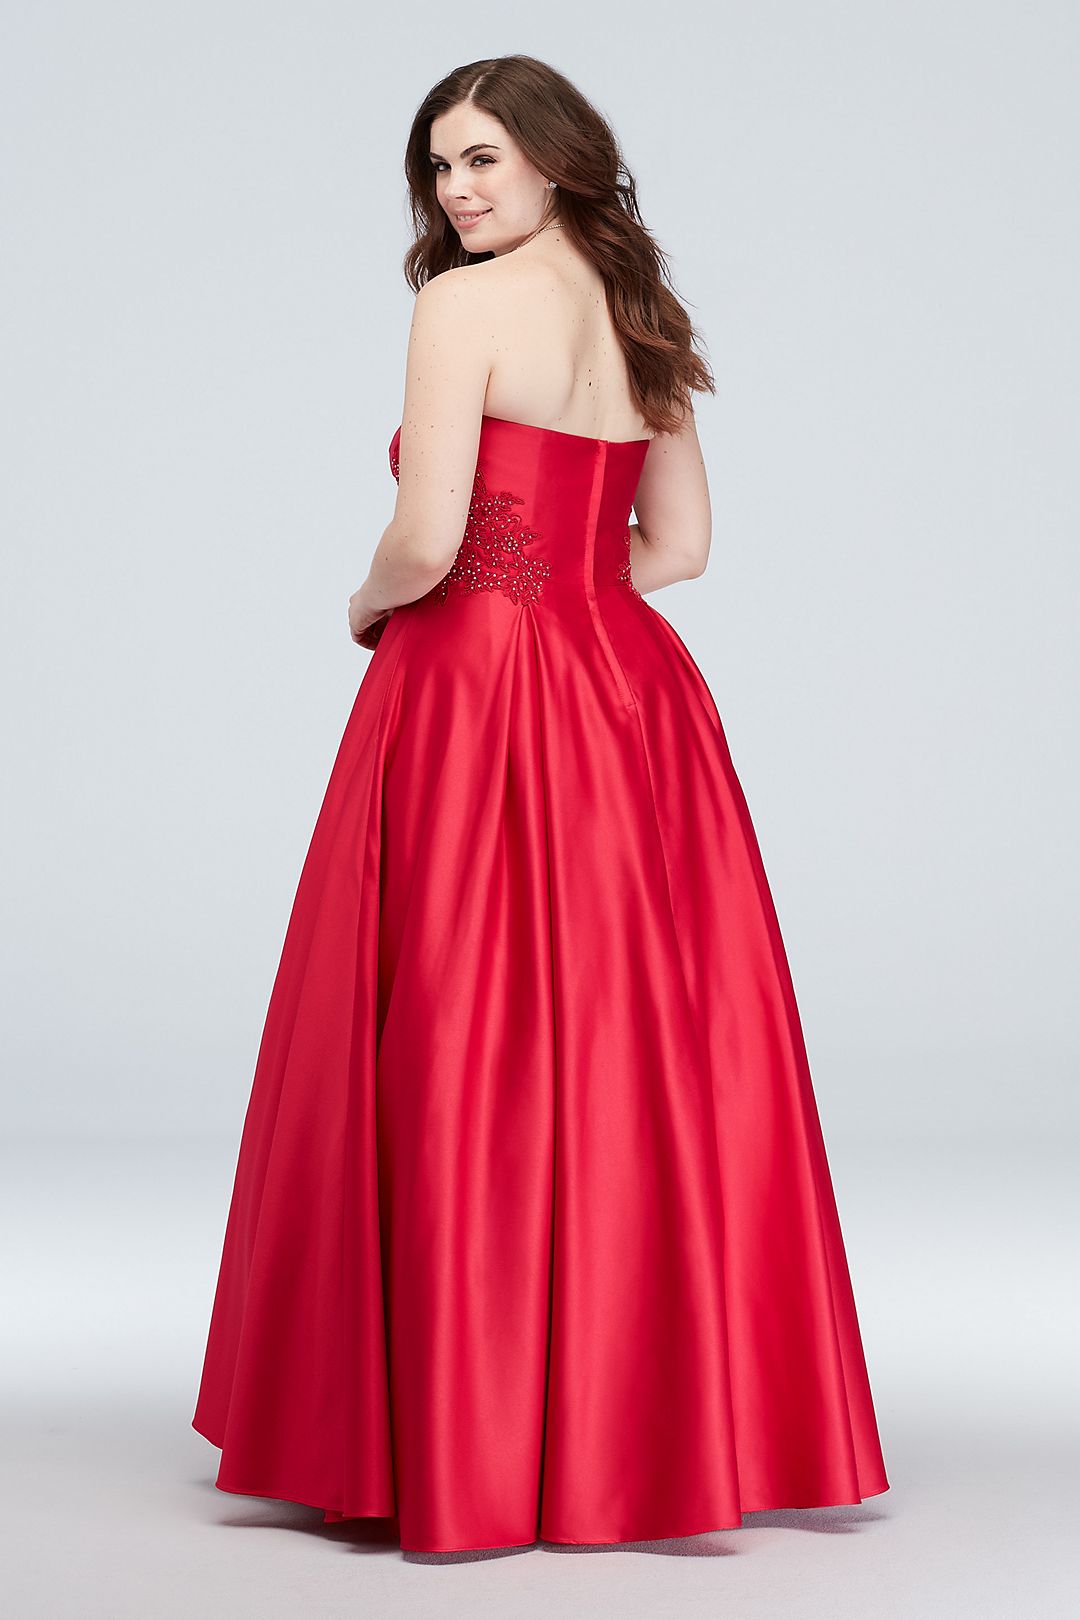 Strapless Satin Ball Gown with Waist Embellishment Image 2